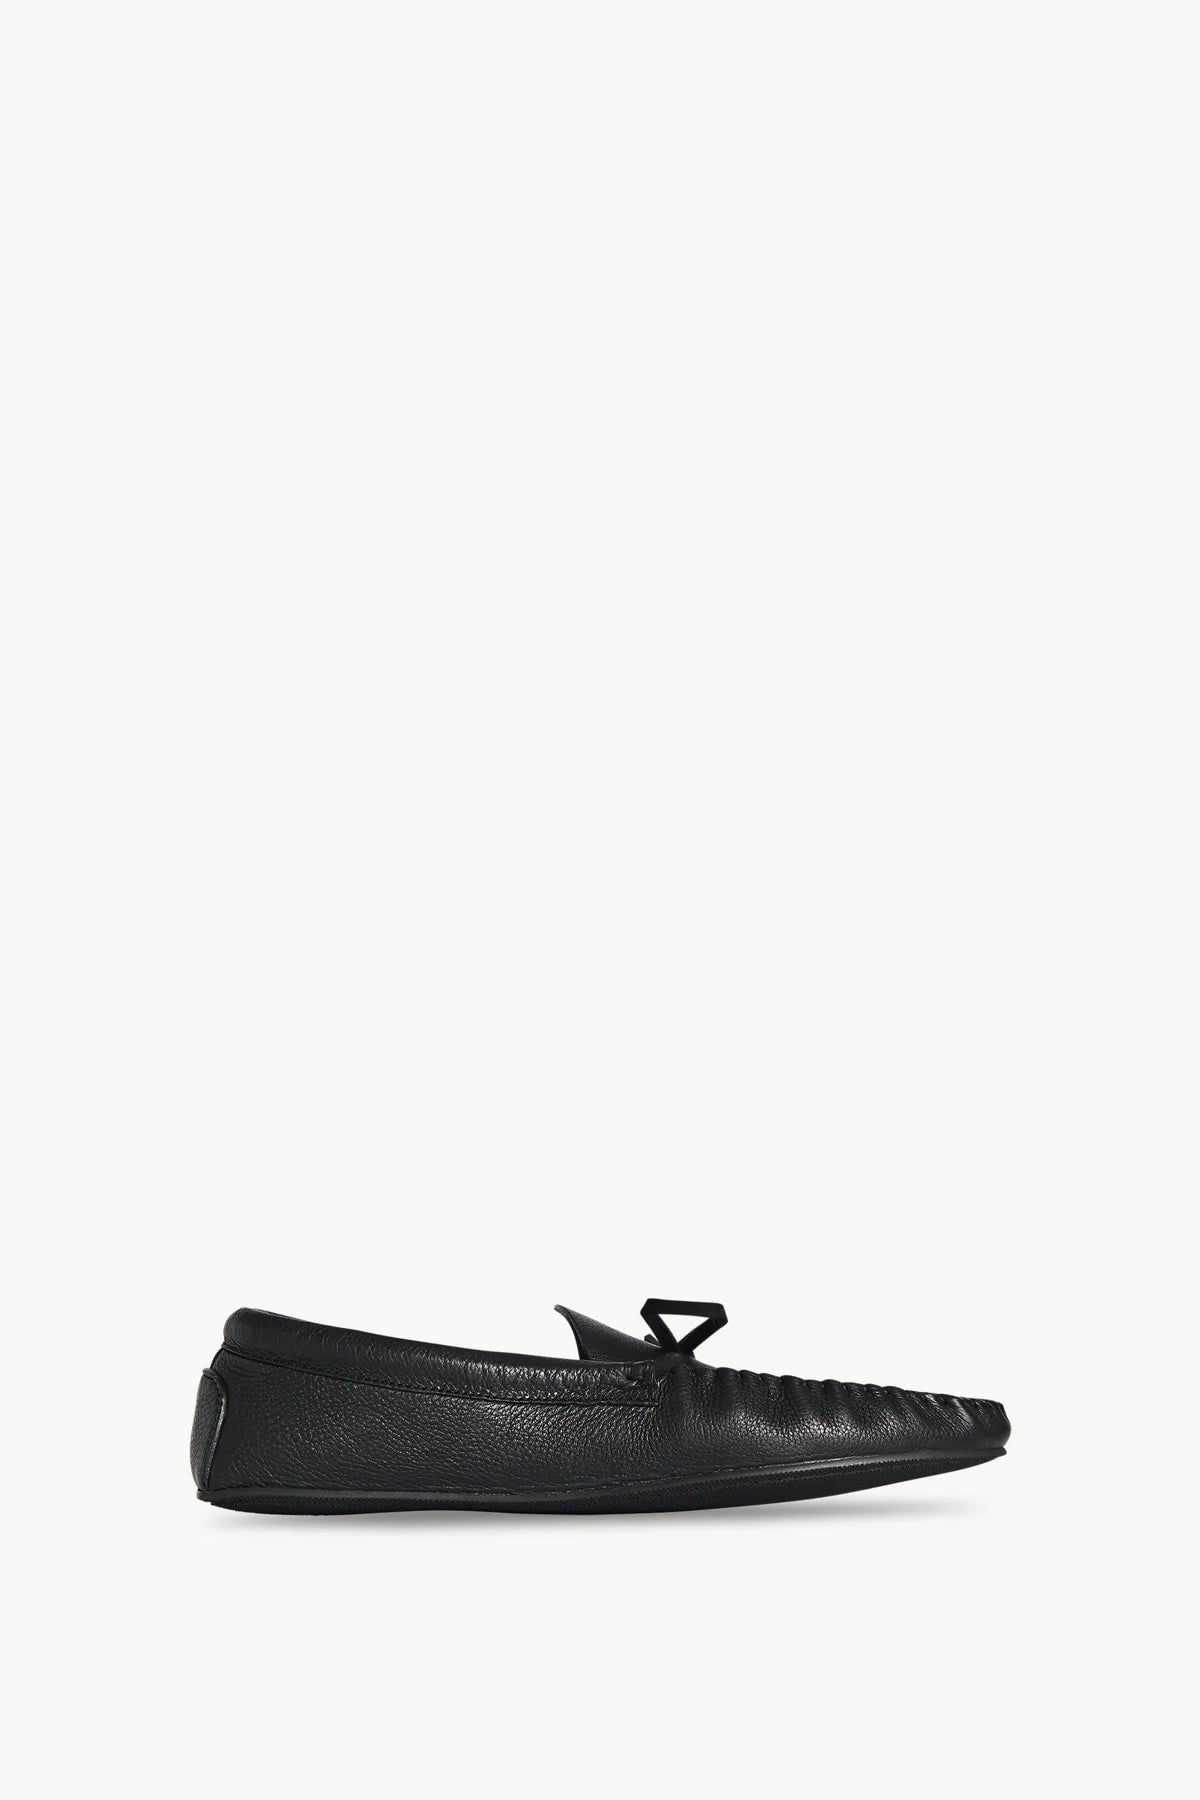 the-row-lucca-mocassin-black-amarees